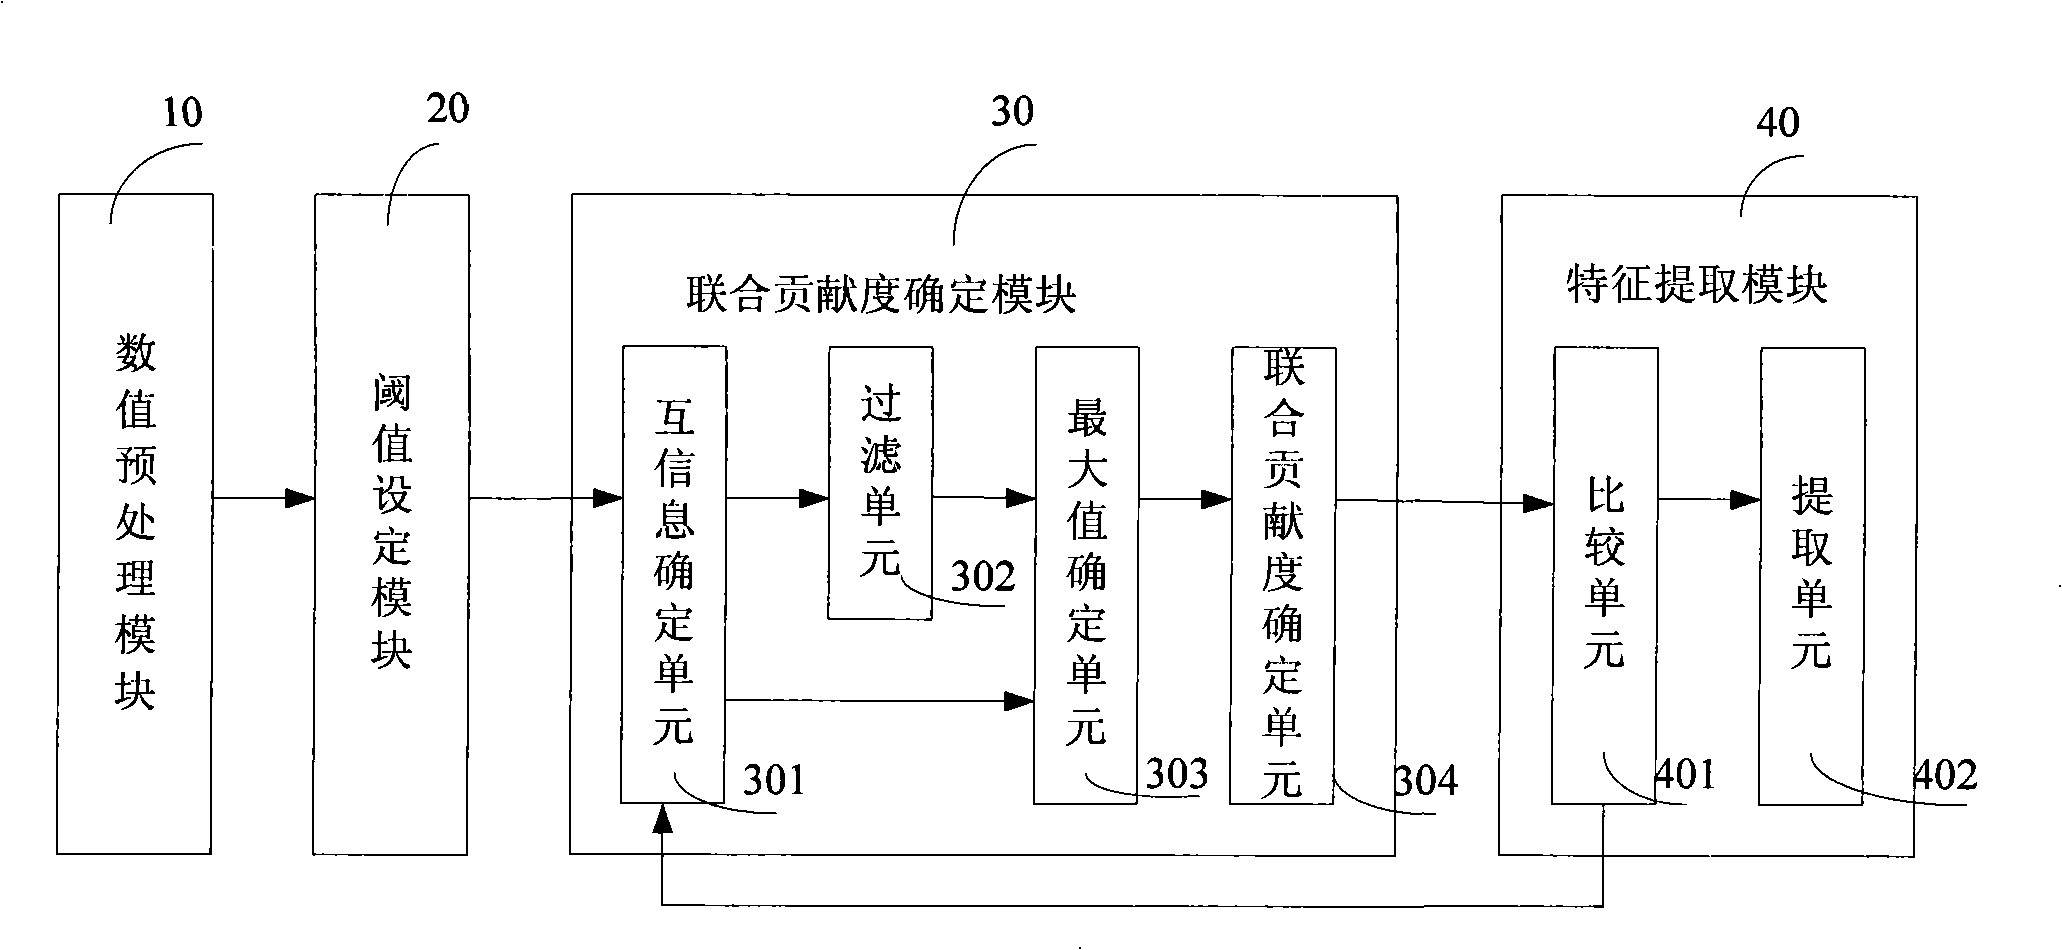 Pattern recognition characteristic extraction method and apparatus